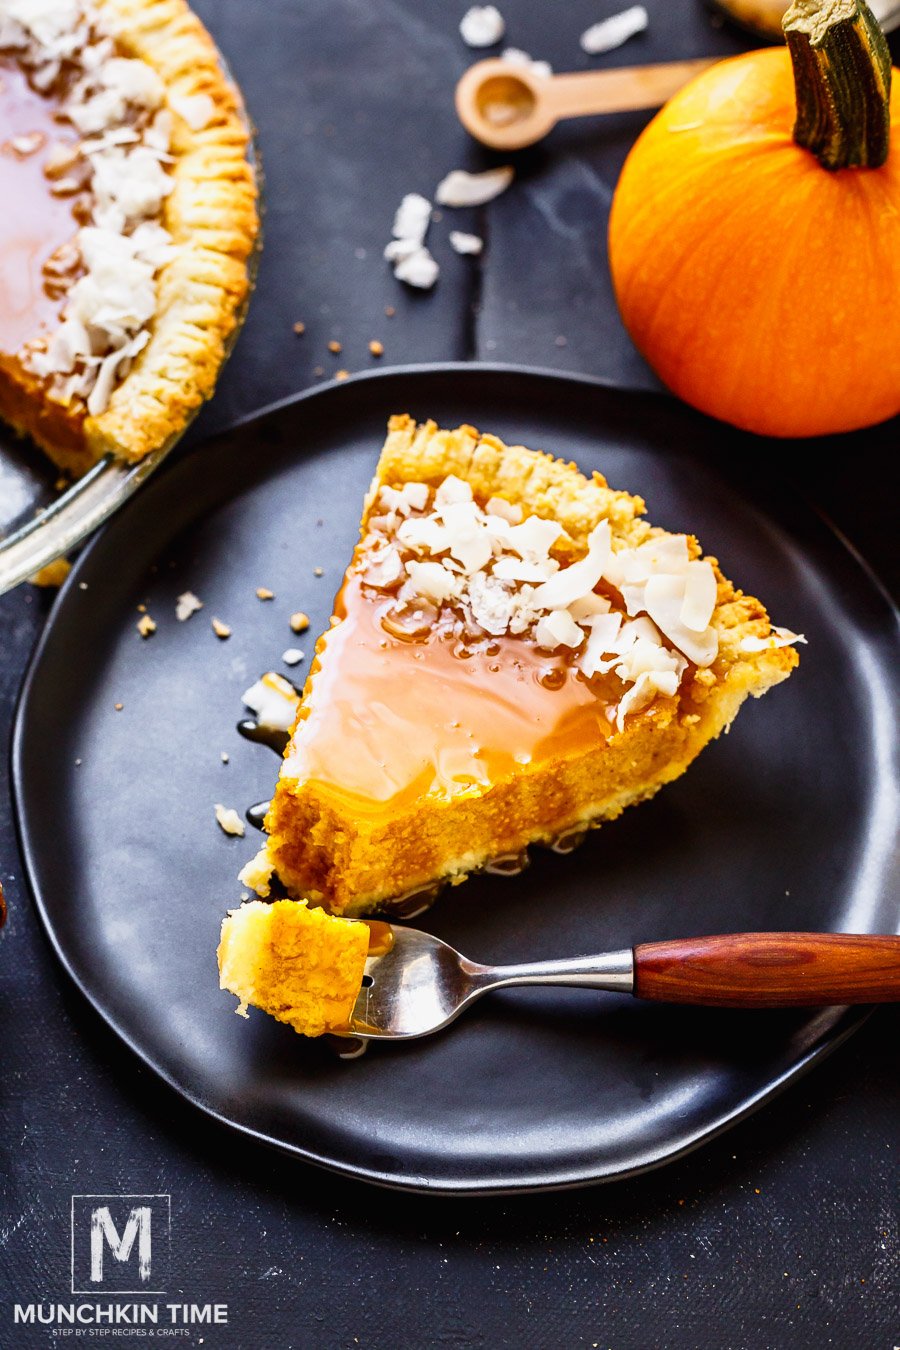 !How to make Pumpkin Pie: Preheat the oven to 350F. Using food processor or a blender. Combine 2 1/2 cups of fresh pumpkin puree, 1 egg, 1/8 of salt, 1/2 teaspoon ginger, 1 teaspoon ground cinnamon, 1/2 teaspoon nutmeg, 1/8 teaspoon ground cloves, and 1 can of condensed milk. Pulse until everything is combined, then pour the pumpkin filling into a prepared gluten free pumpkin crust. Bake for 55 - 60 minutes, or until knife inserted in the center comes out clean. Let the pumpkin pie cool. Drizzle the caramel over the top and garnish with coconut flakes. Cut a slice and enjoy!